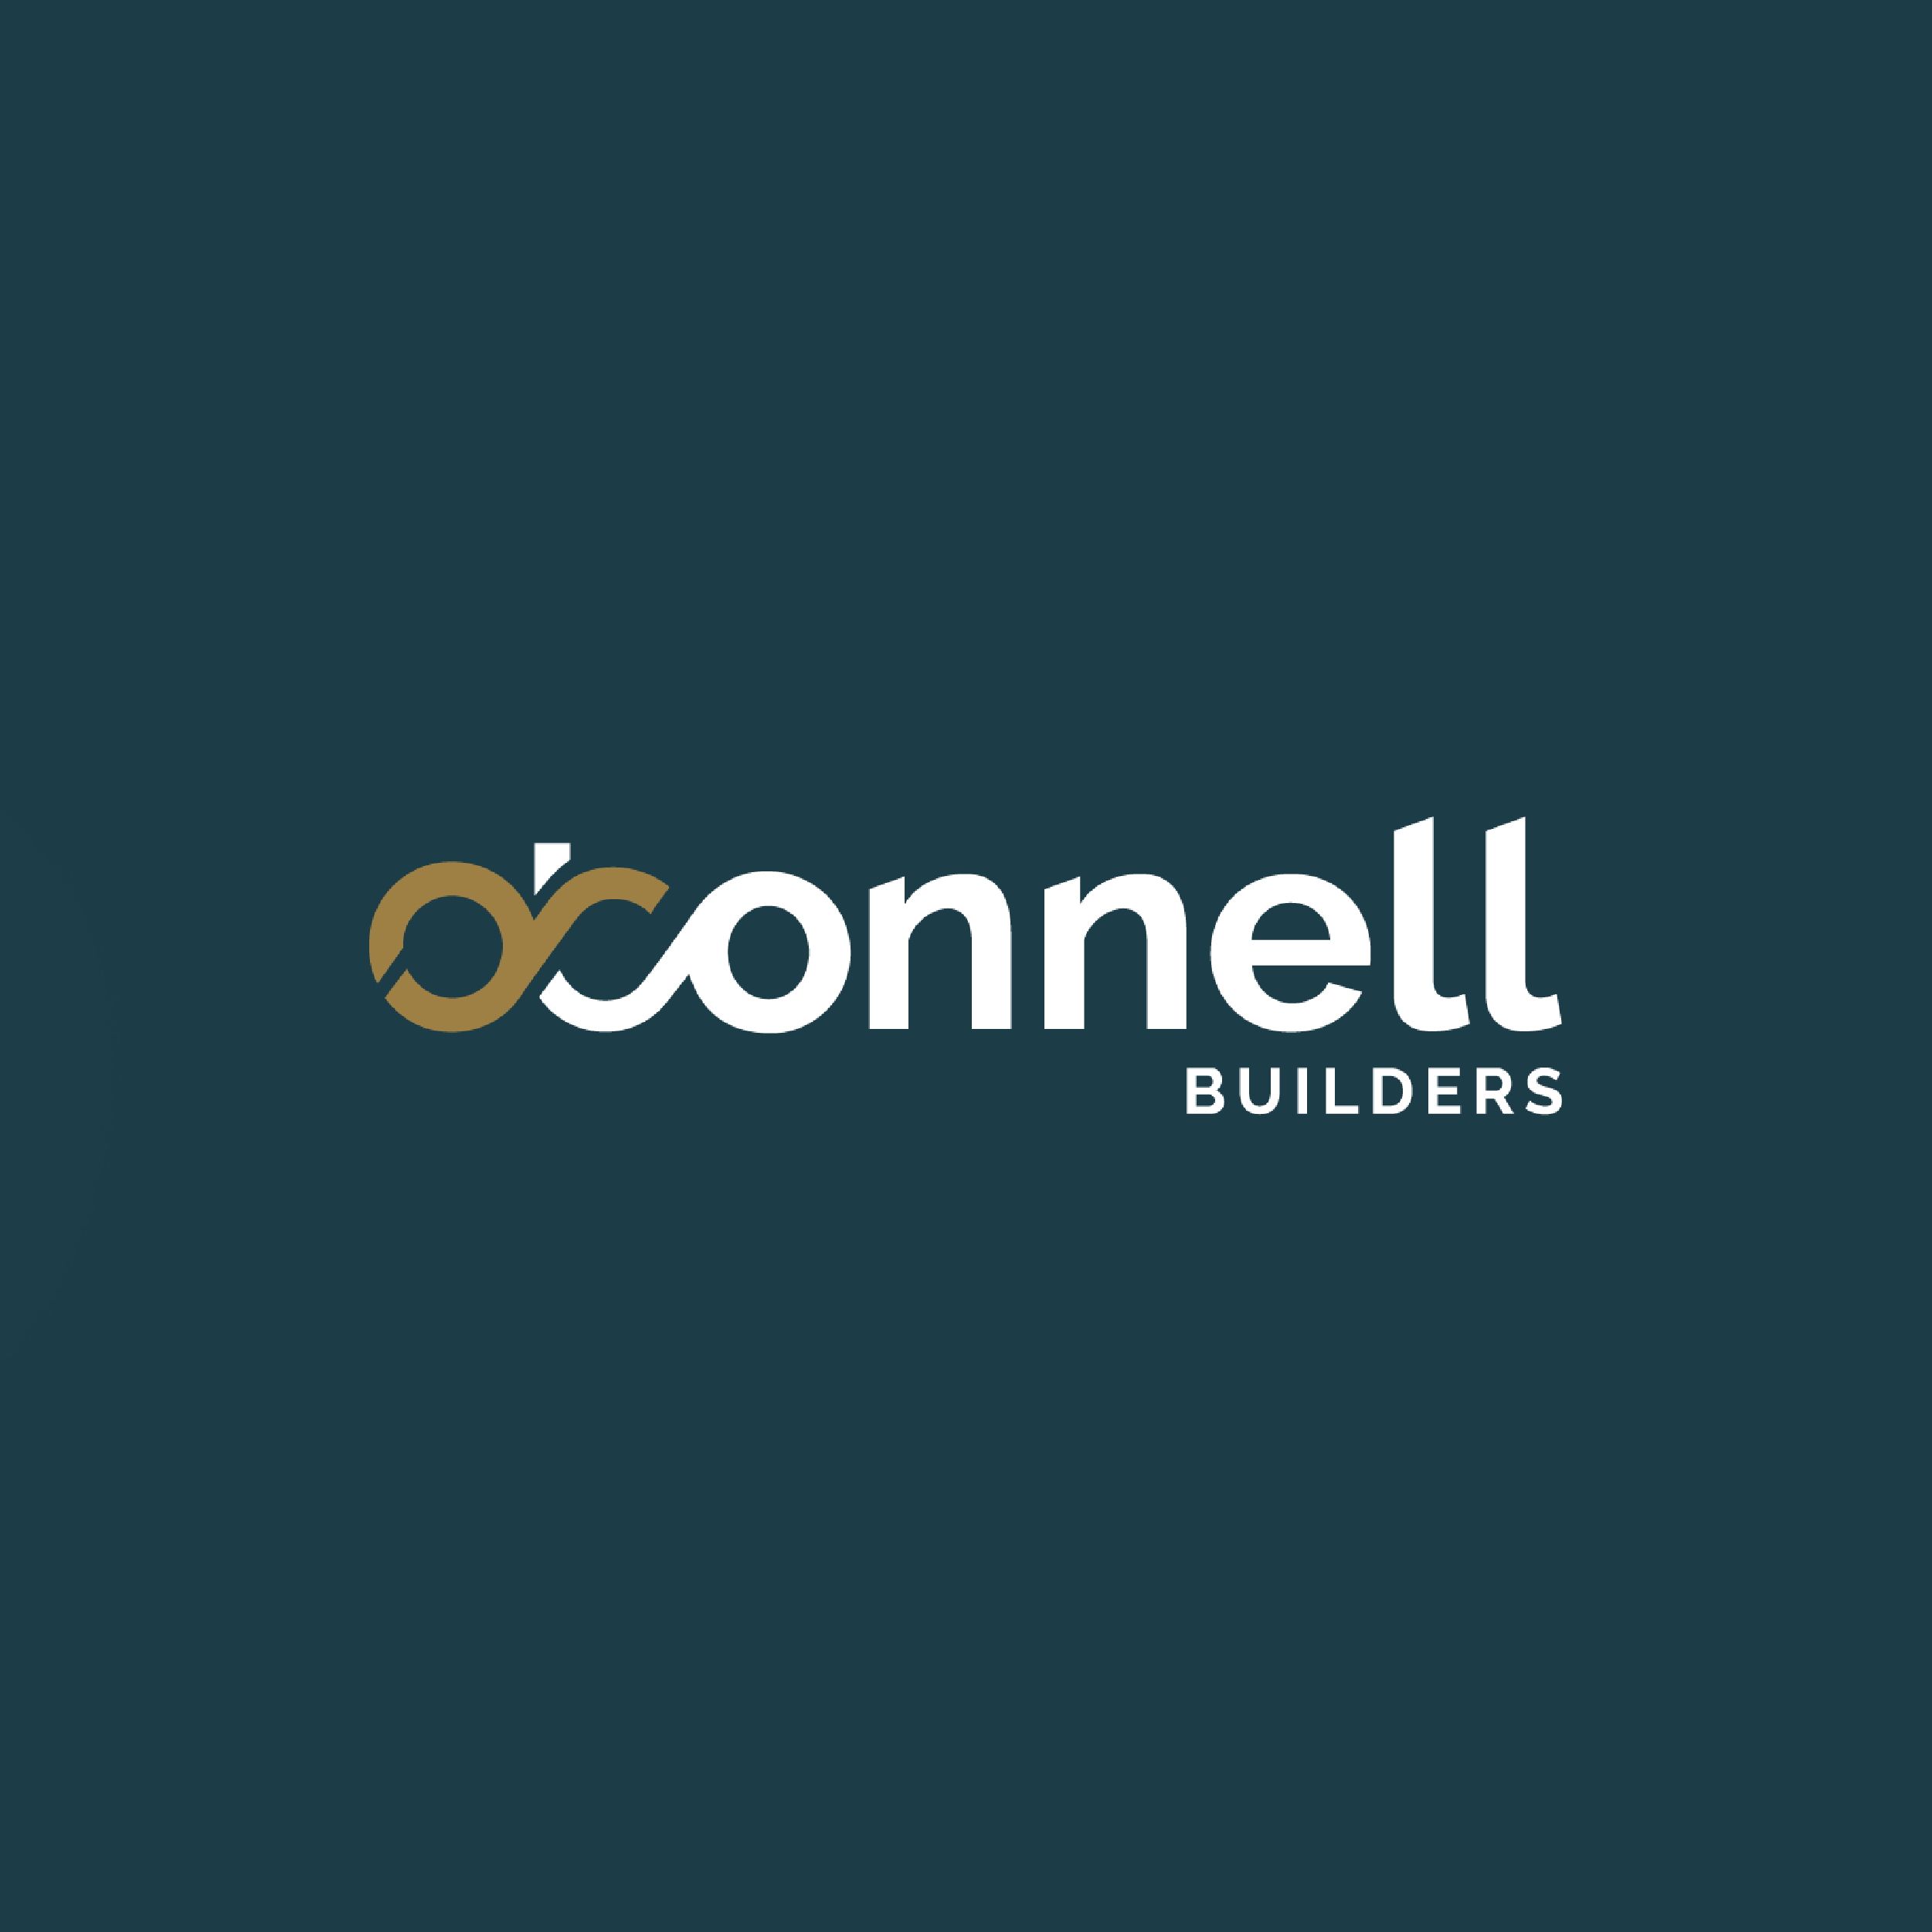 O’Connell Builders